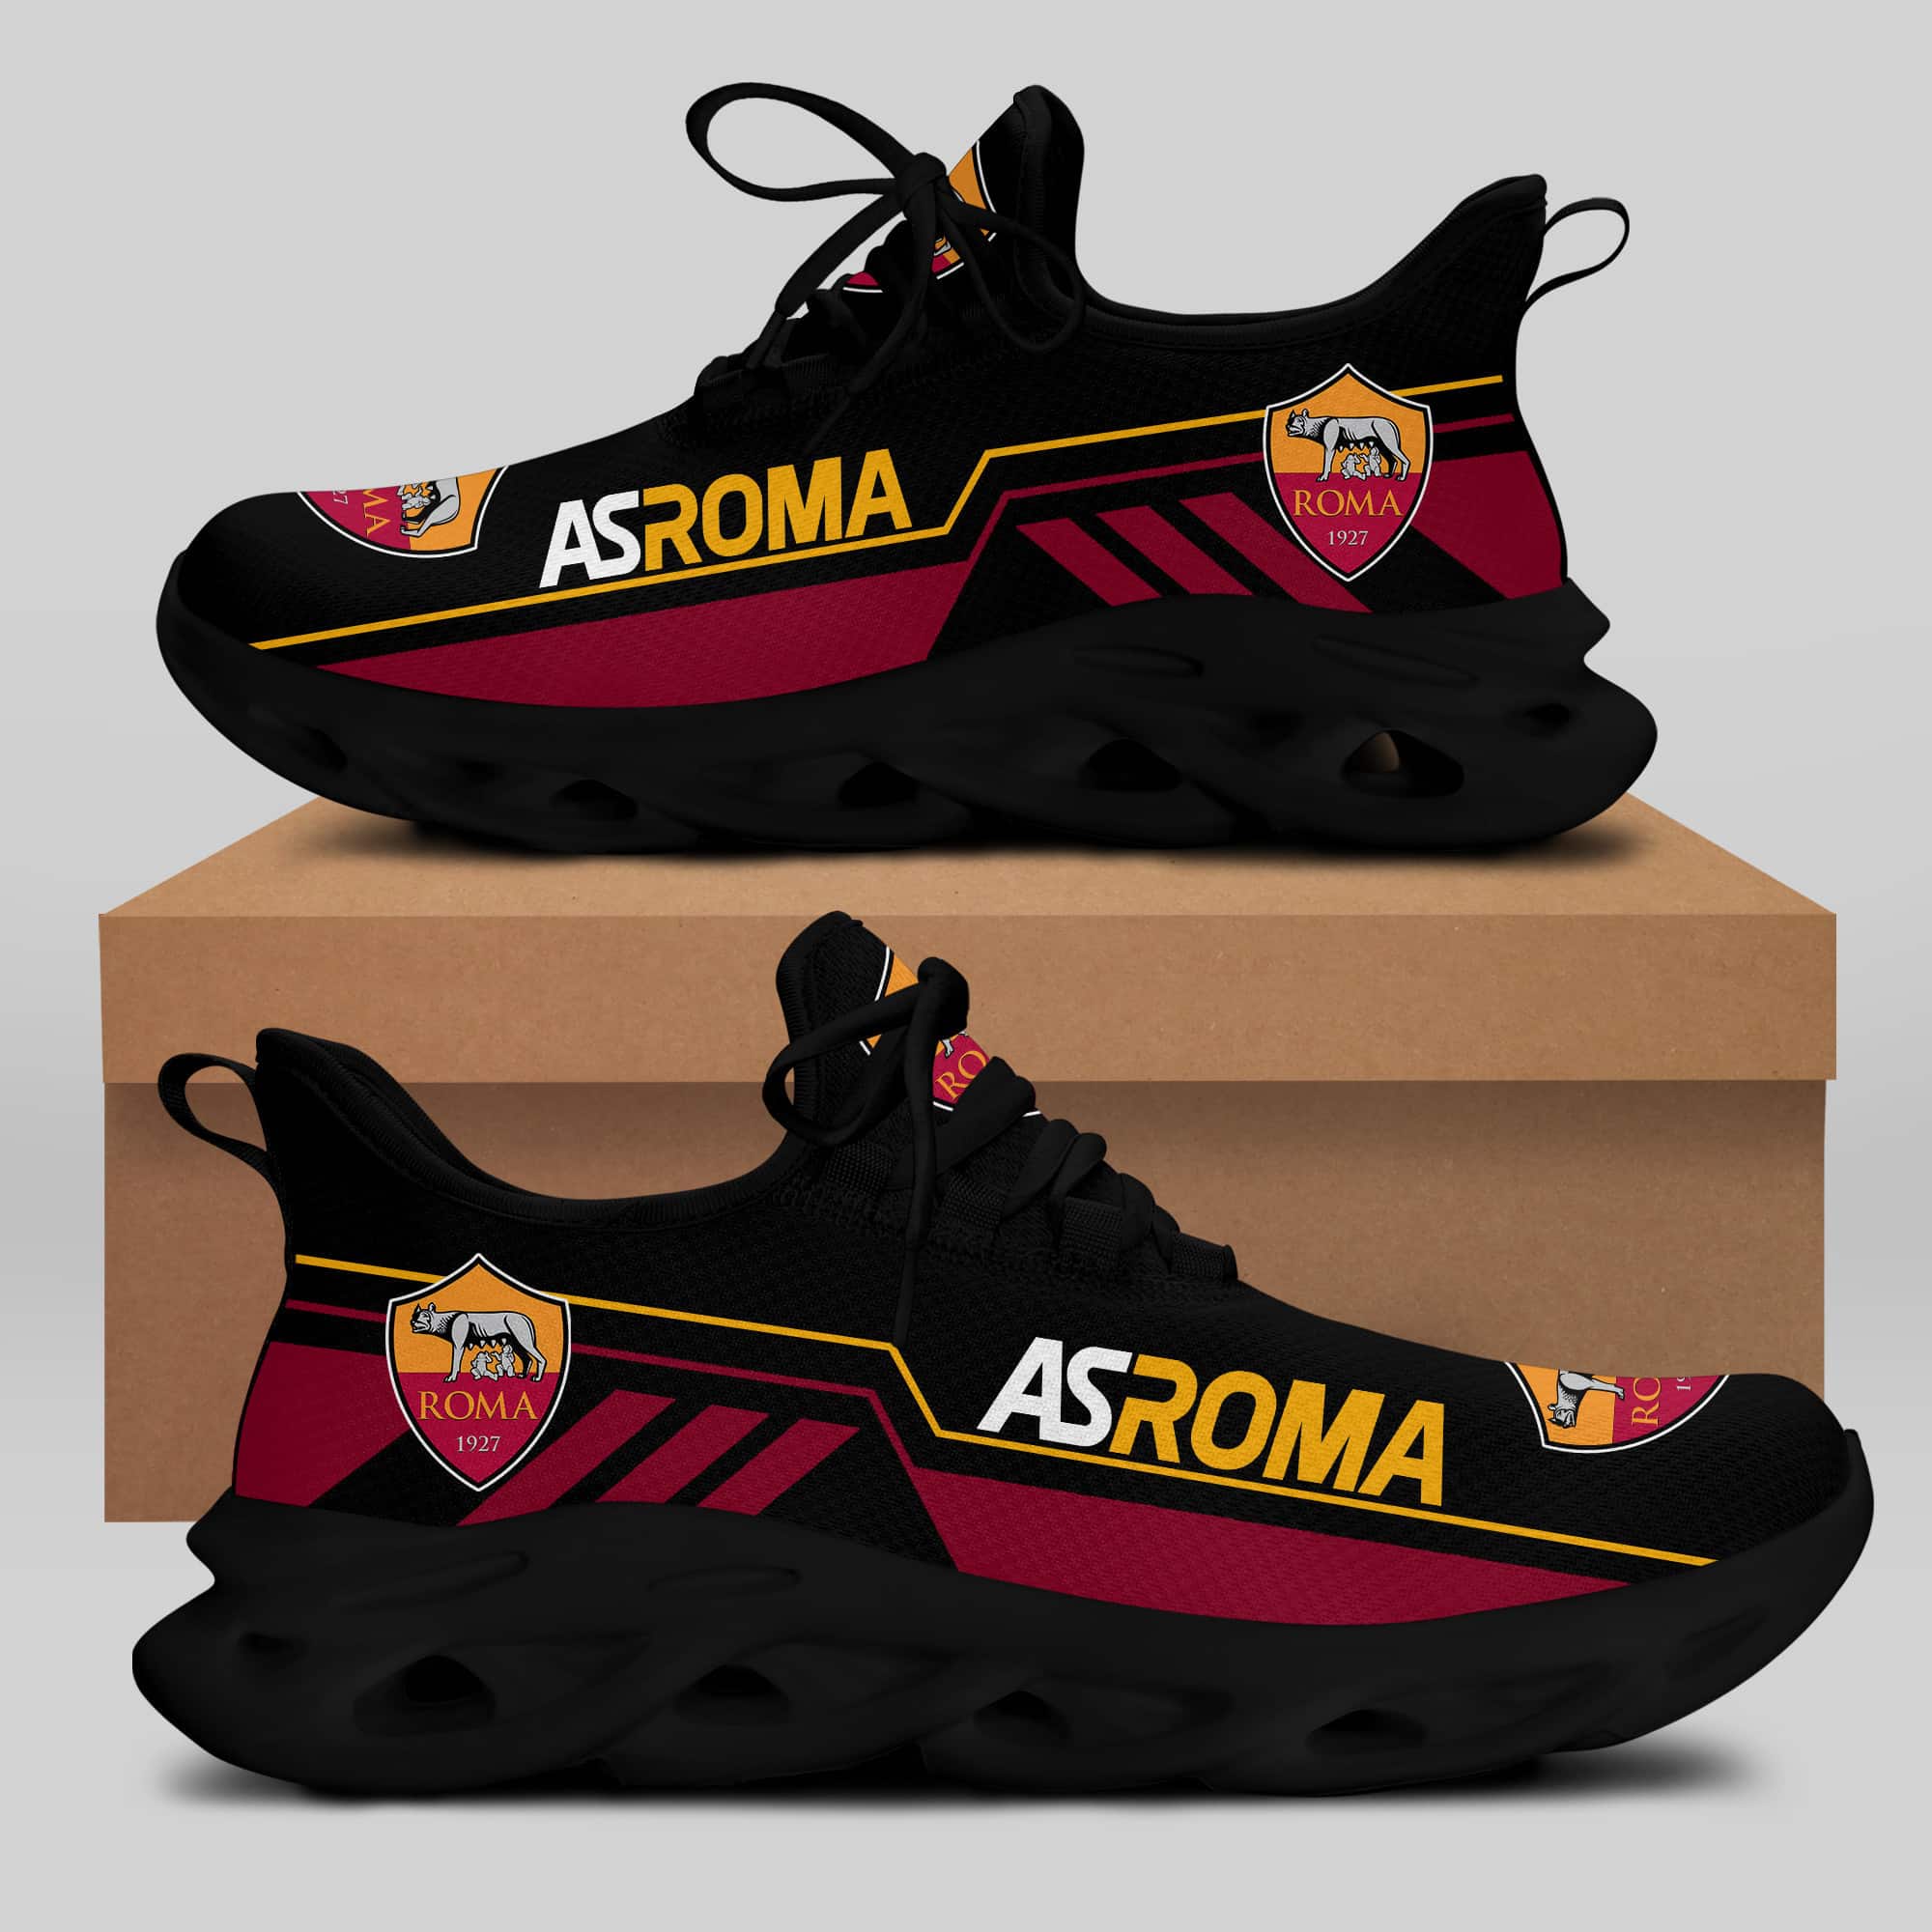 As Roma Running Shoes Max Soul Shoes Sneakers Ver 23 1